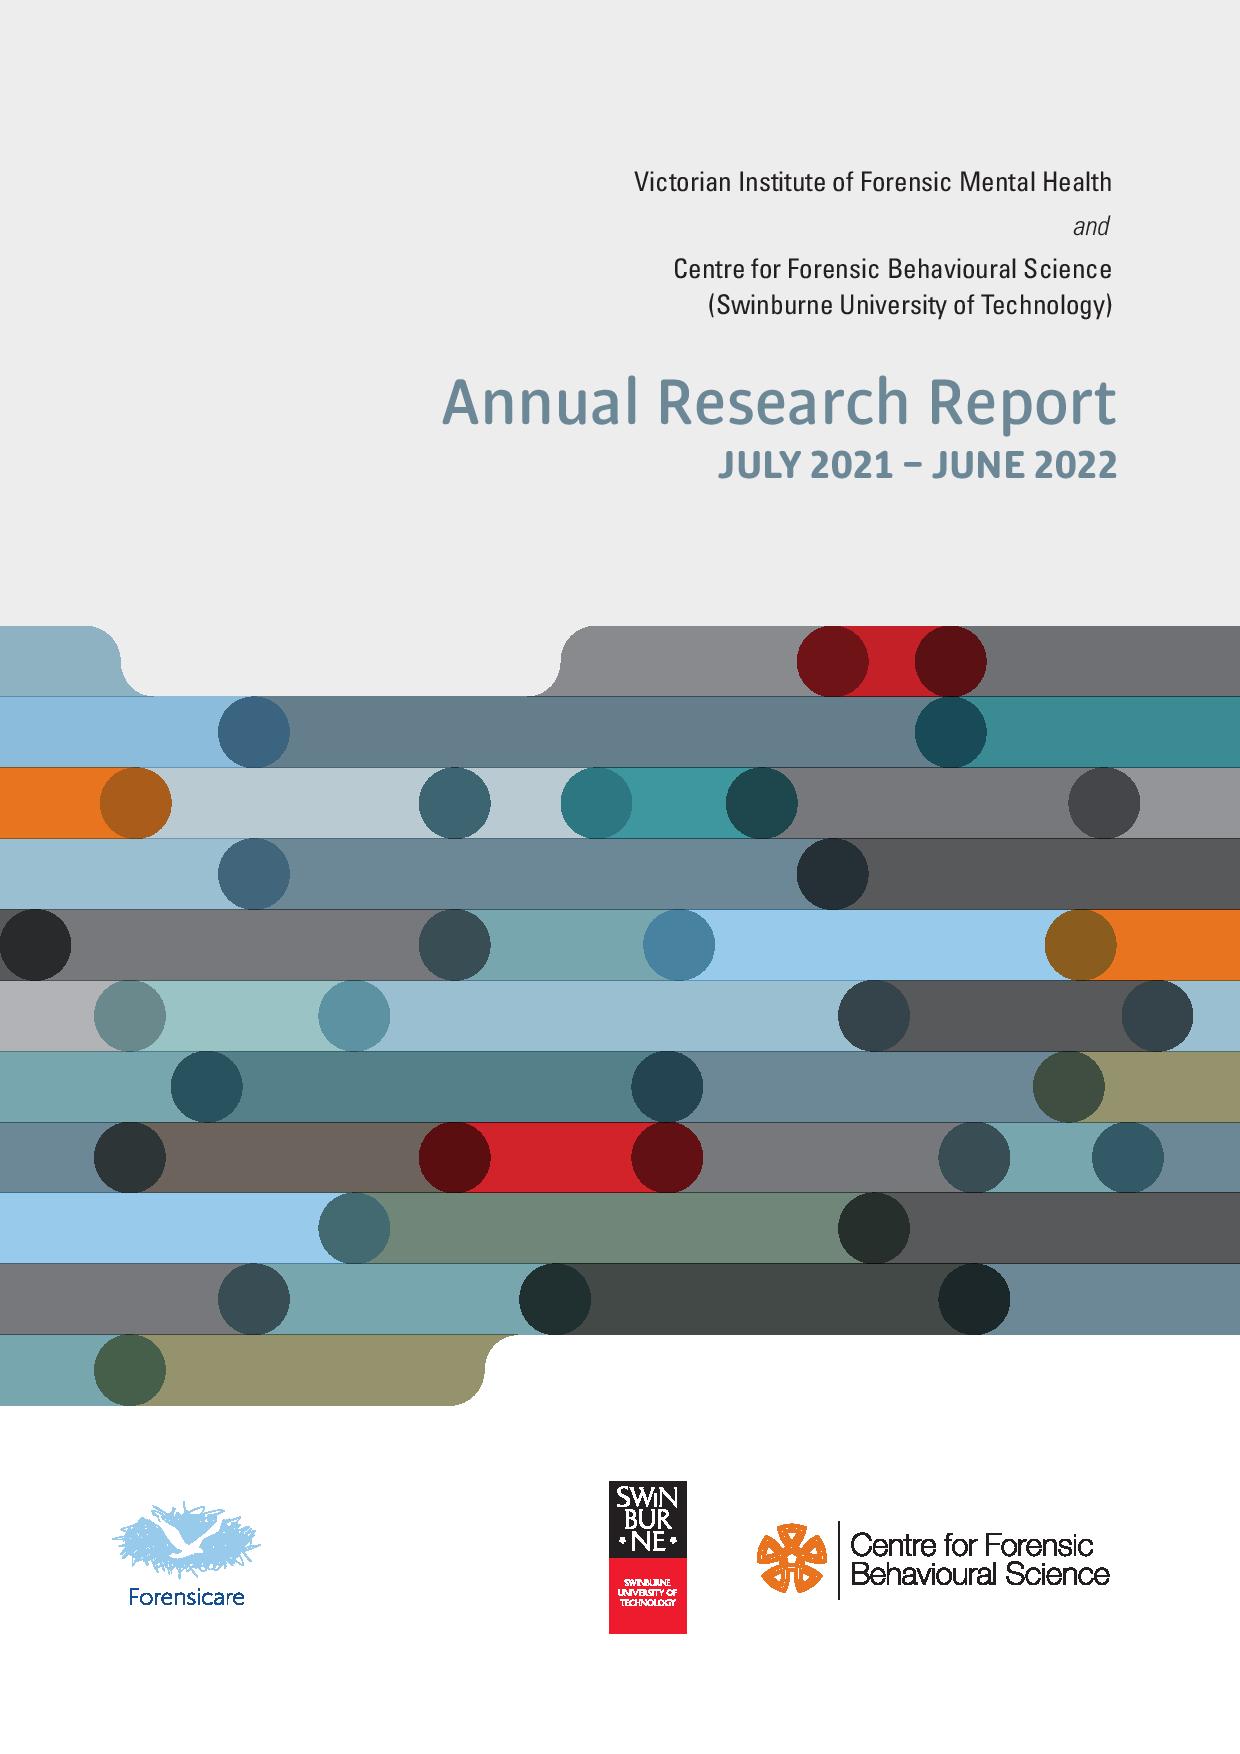 Annual Research Report 2021-2022